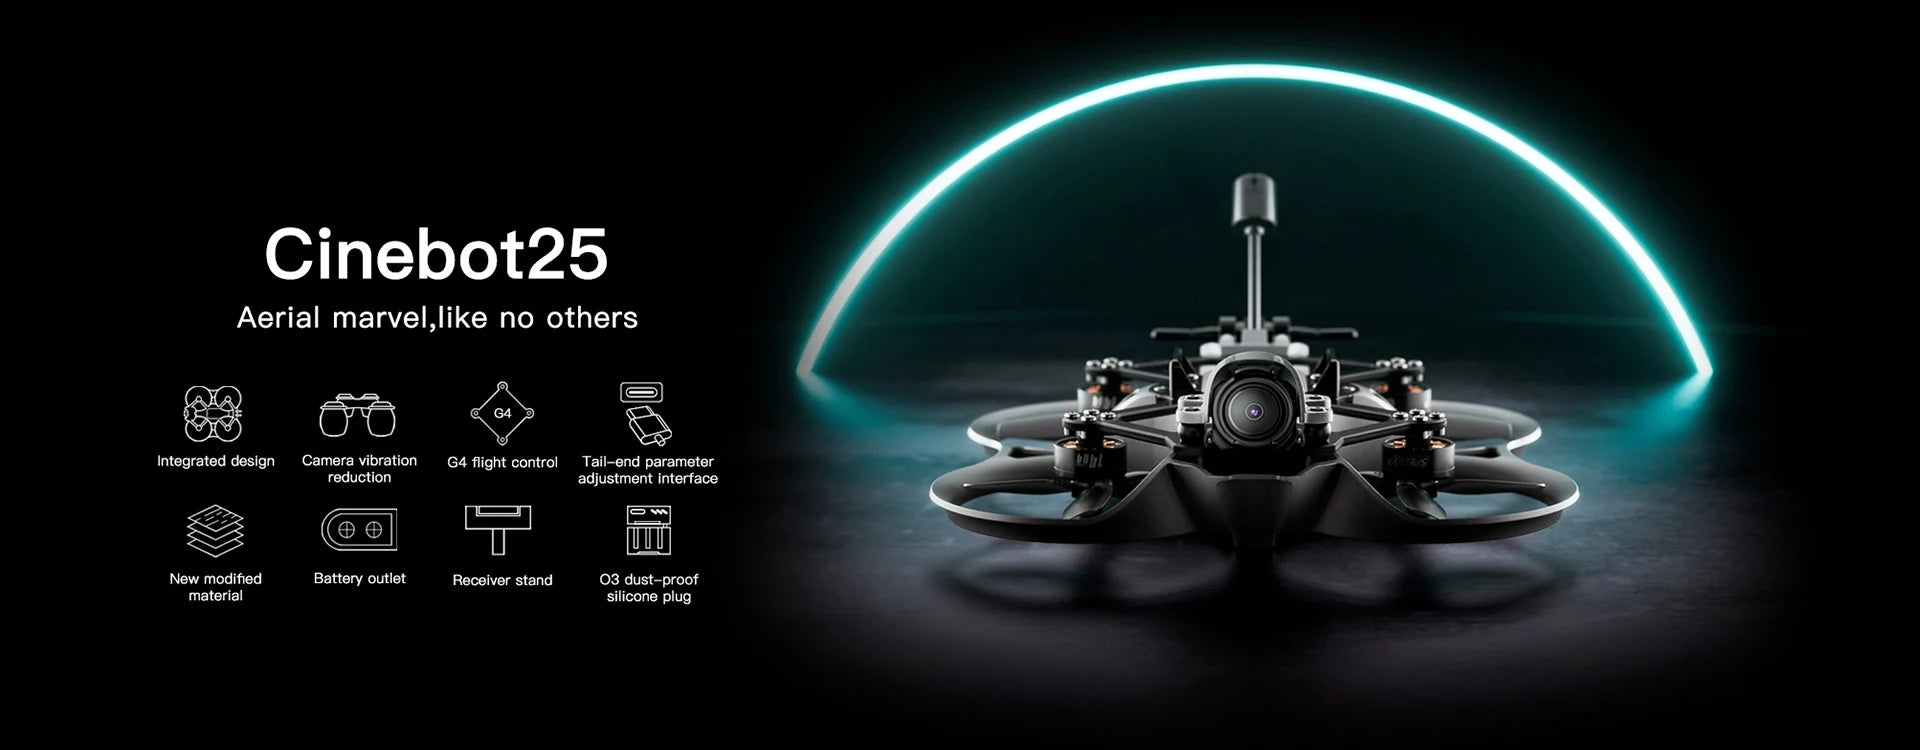 GEPRC Cinebot25 S WTFPV 2.5inch FPV Drone, Cinebot25 Aerial marvel,like no others G4 Integrated design Camera vibration G